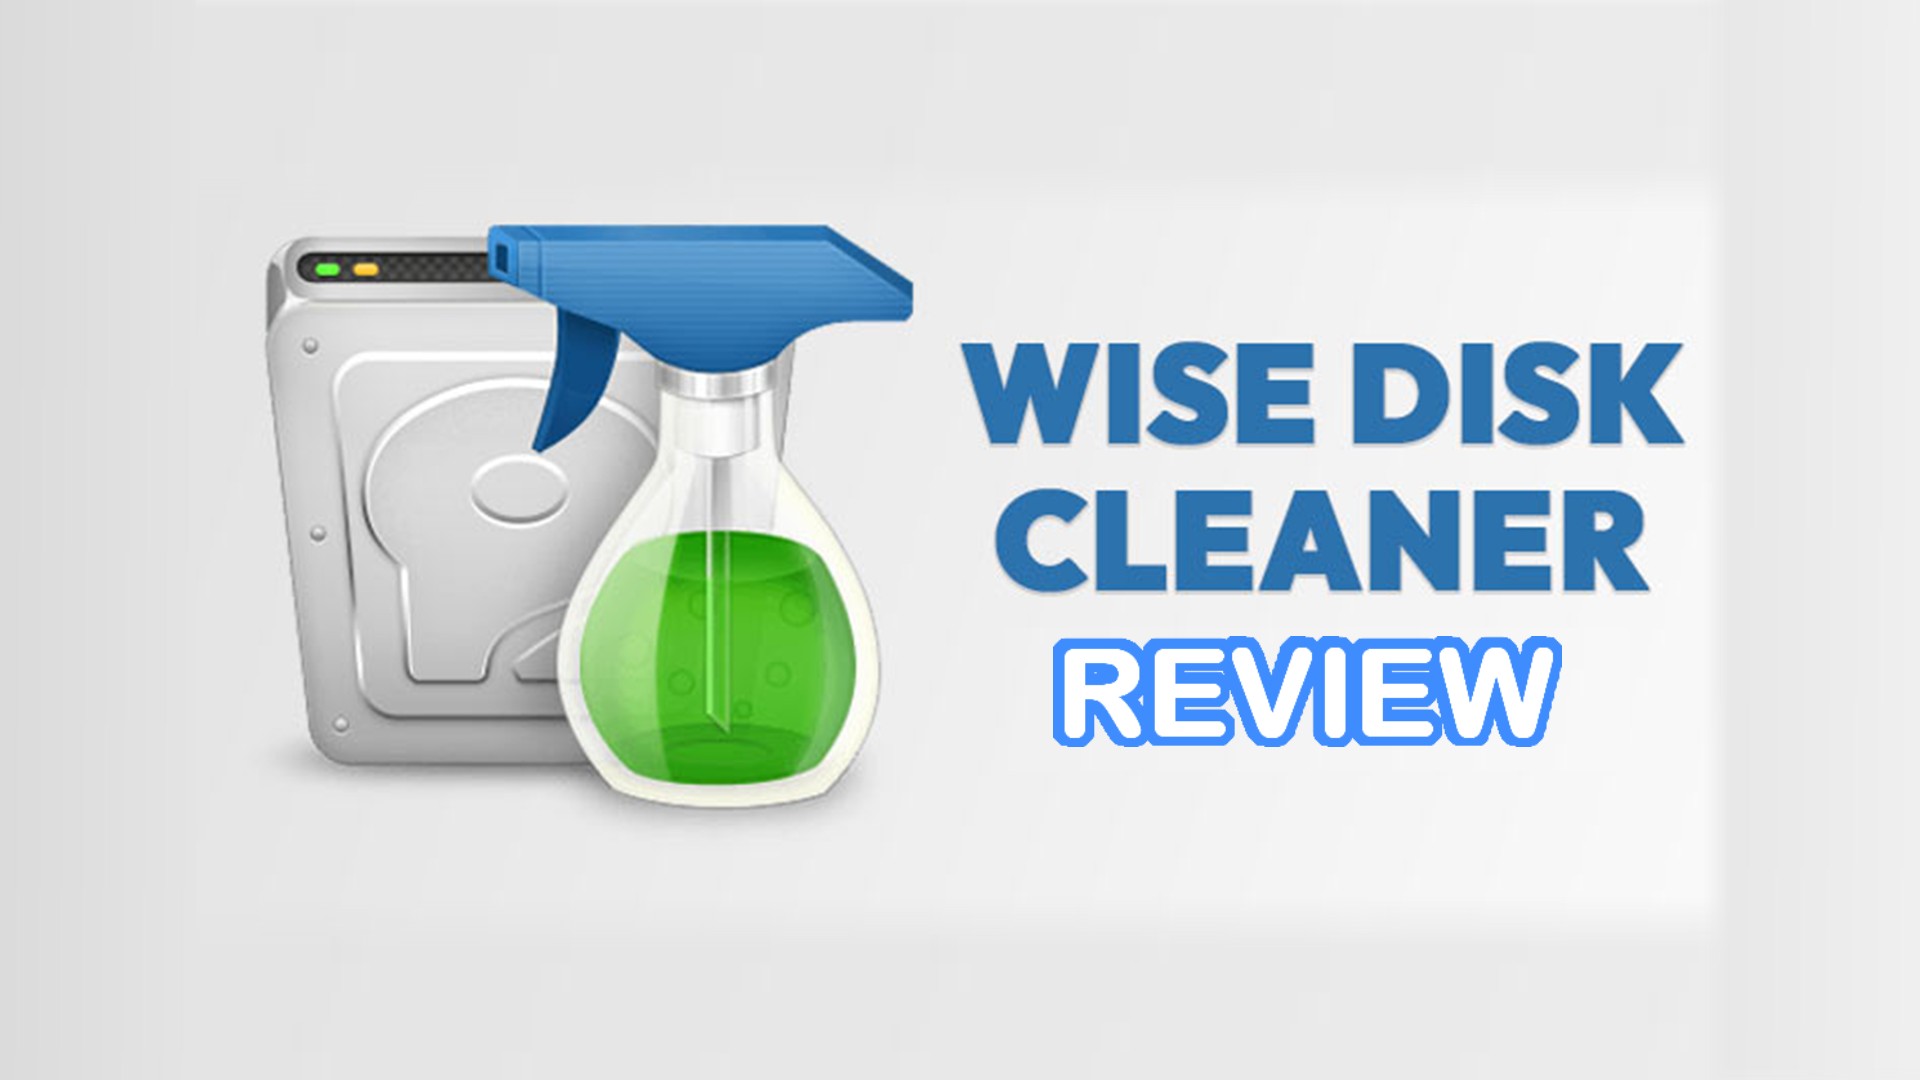 Wise Disk Cleaner Review [How it Compares to Other Cleaners]